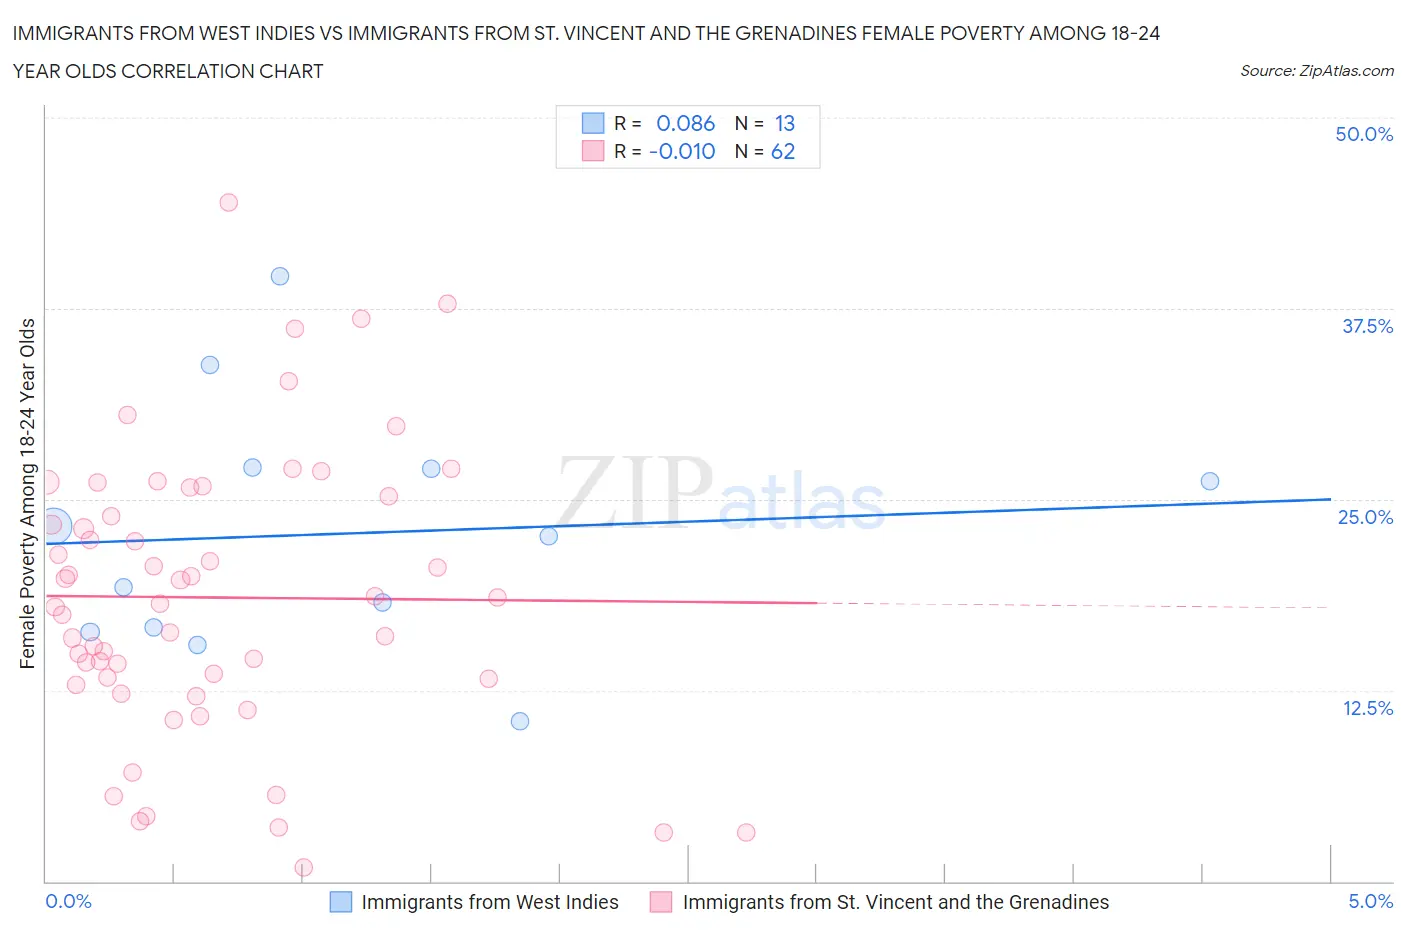 Immigrants from West Indies vs Immigrants from St. Vincent and the Grenadines Female Poverty Among 18-24 Year Olds